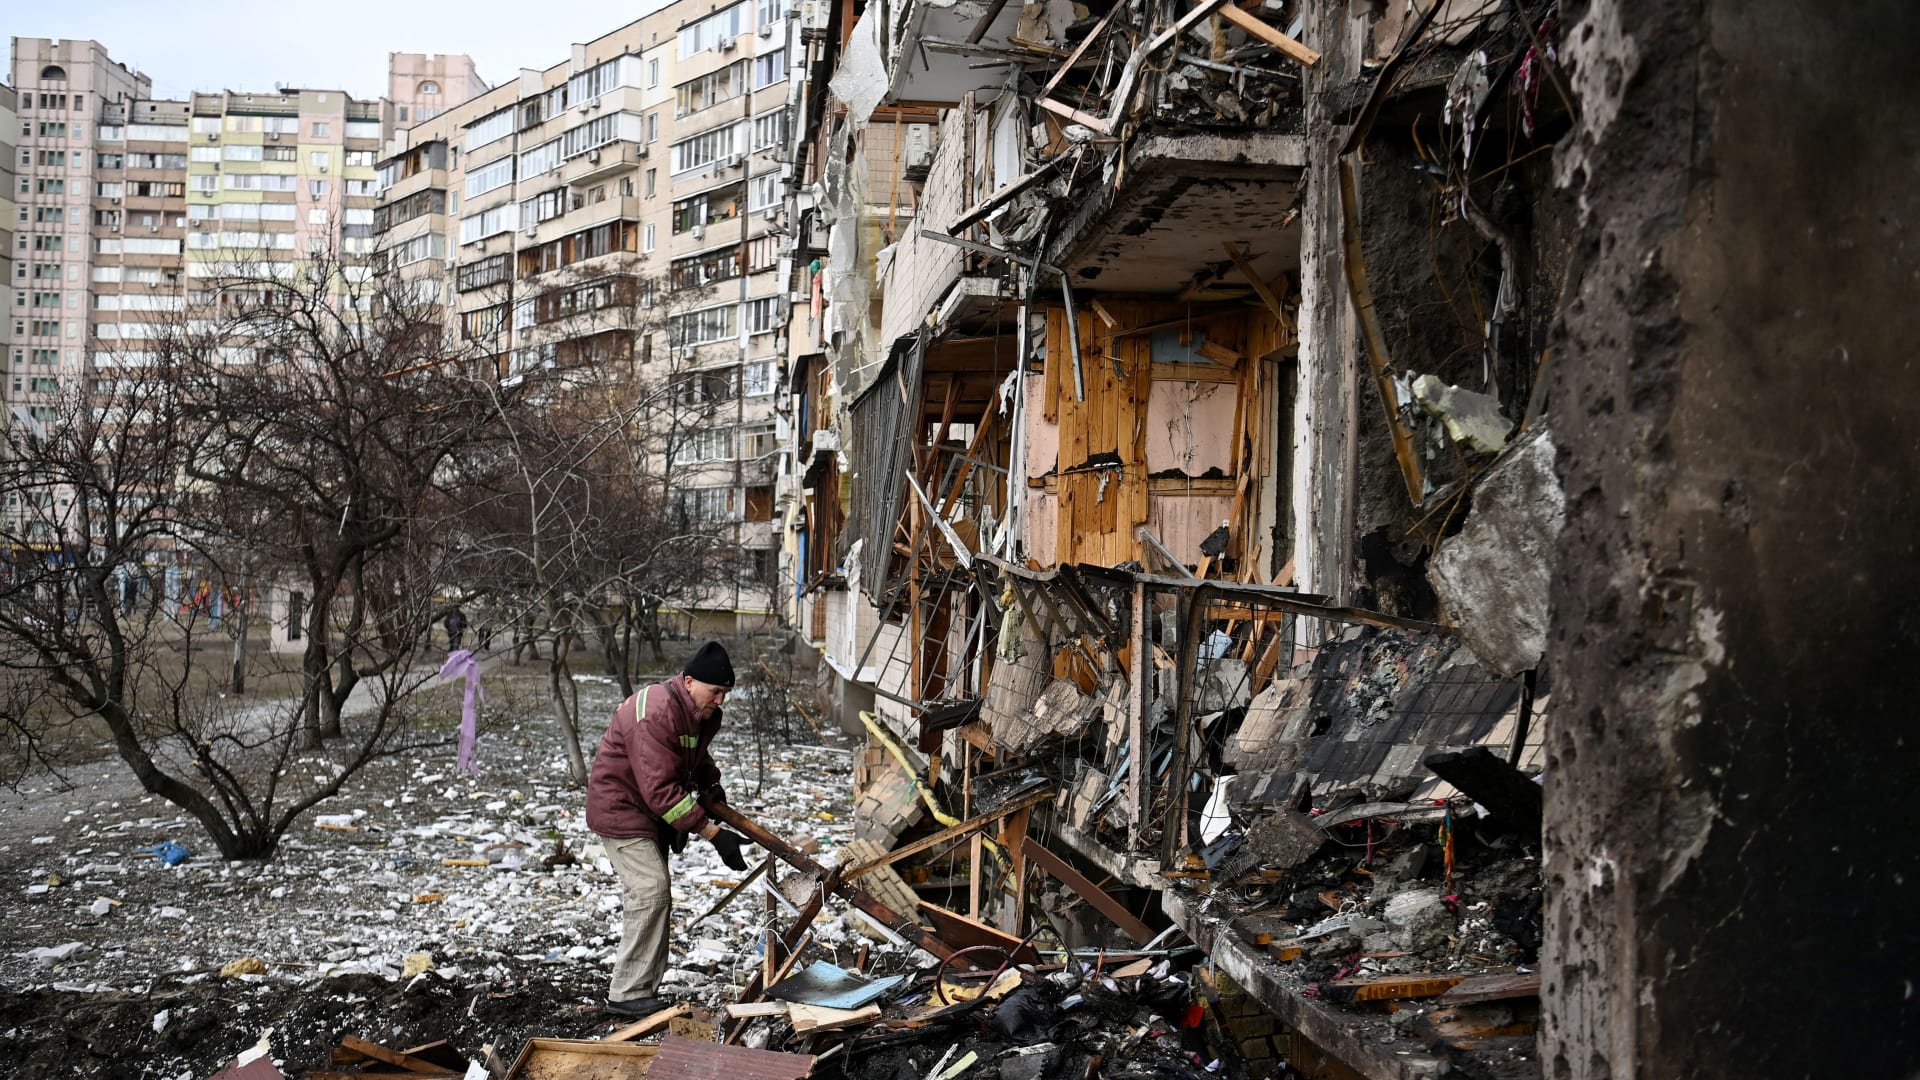 A man clears debris at a damaged residential building at Koshytsa Street, in a suburb of the Ukrainian capital, Kyiv.